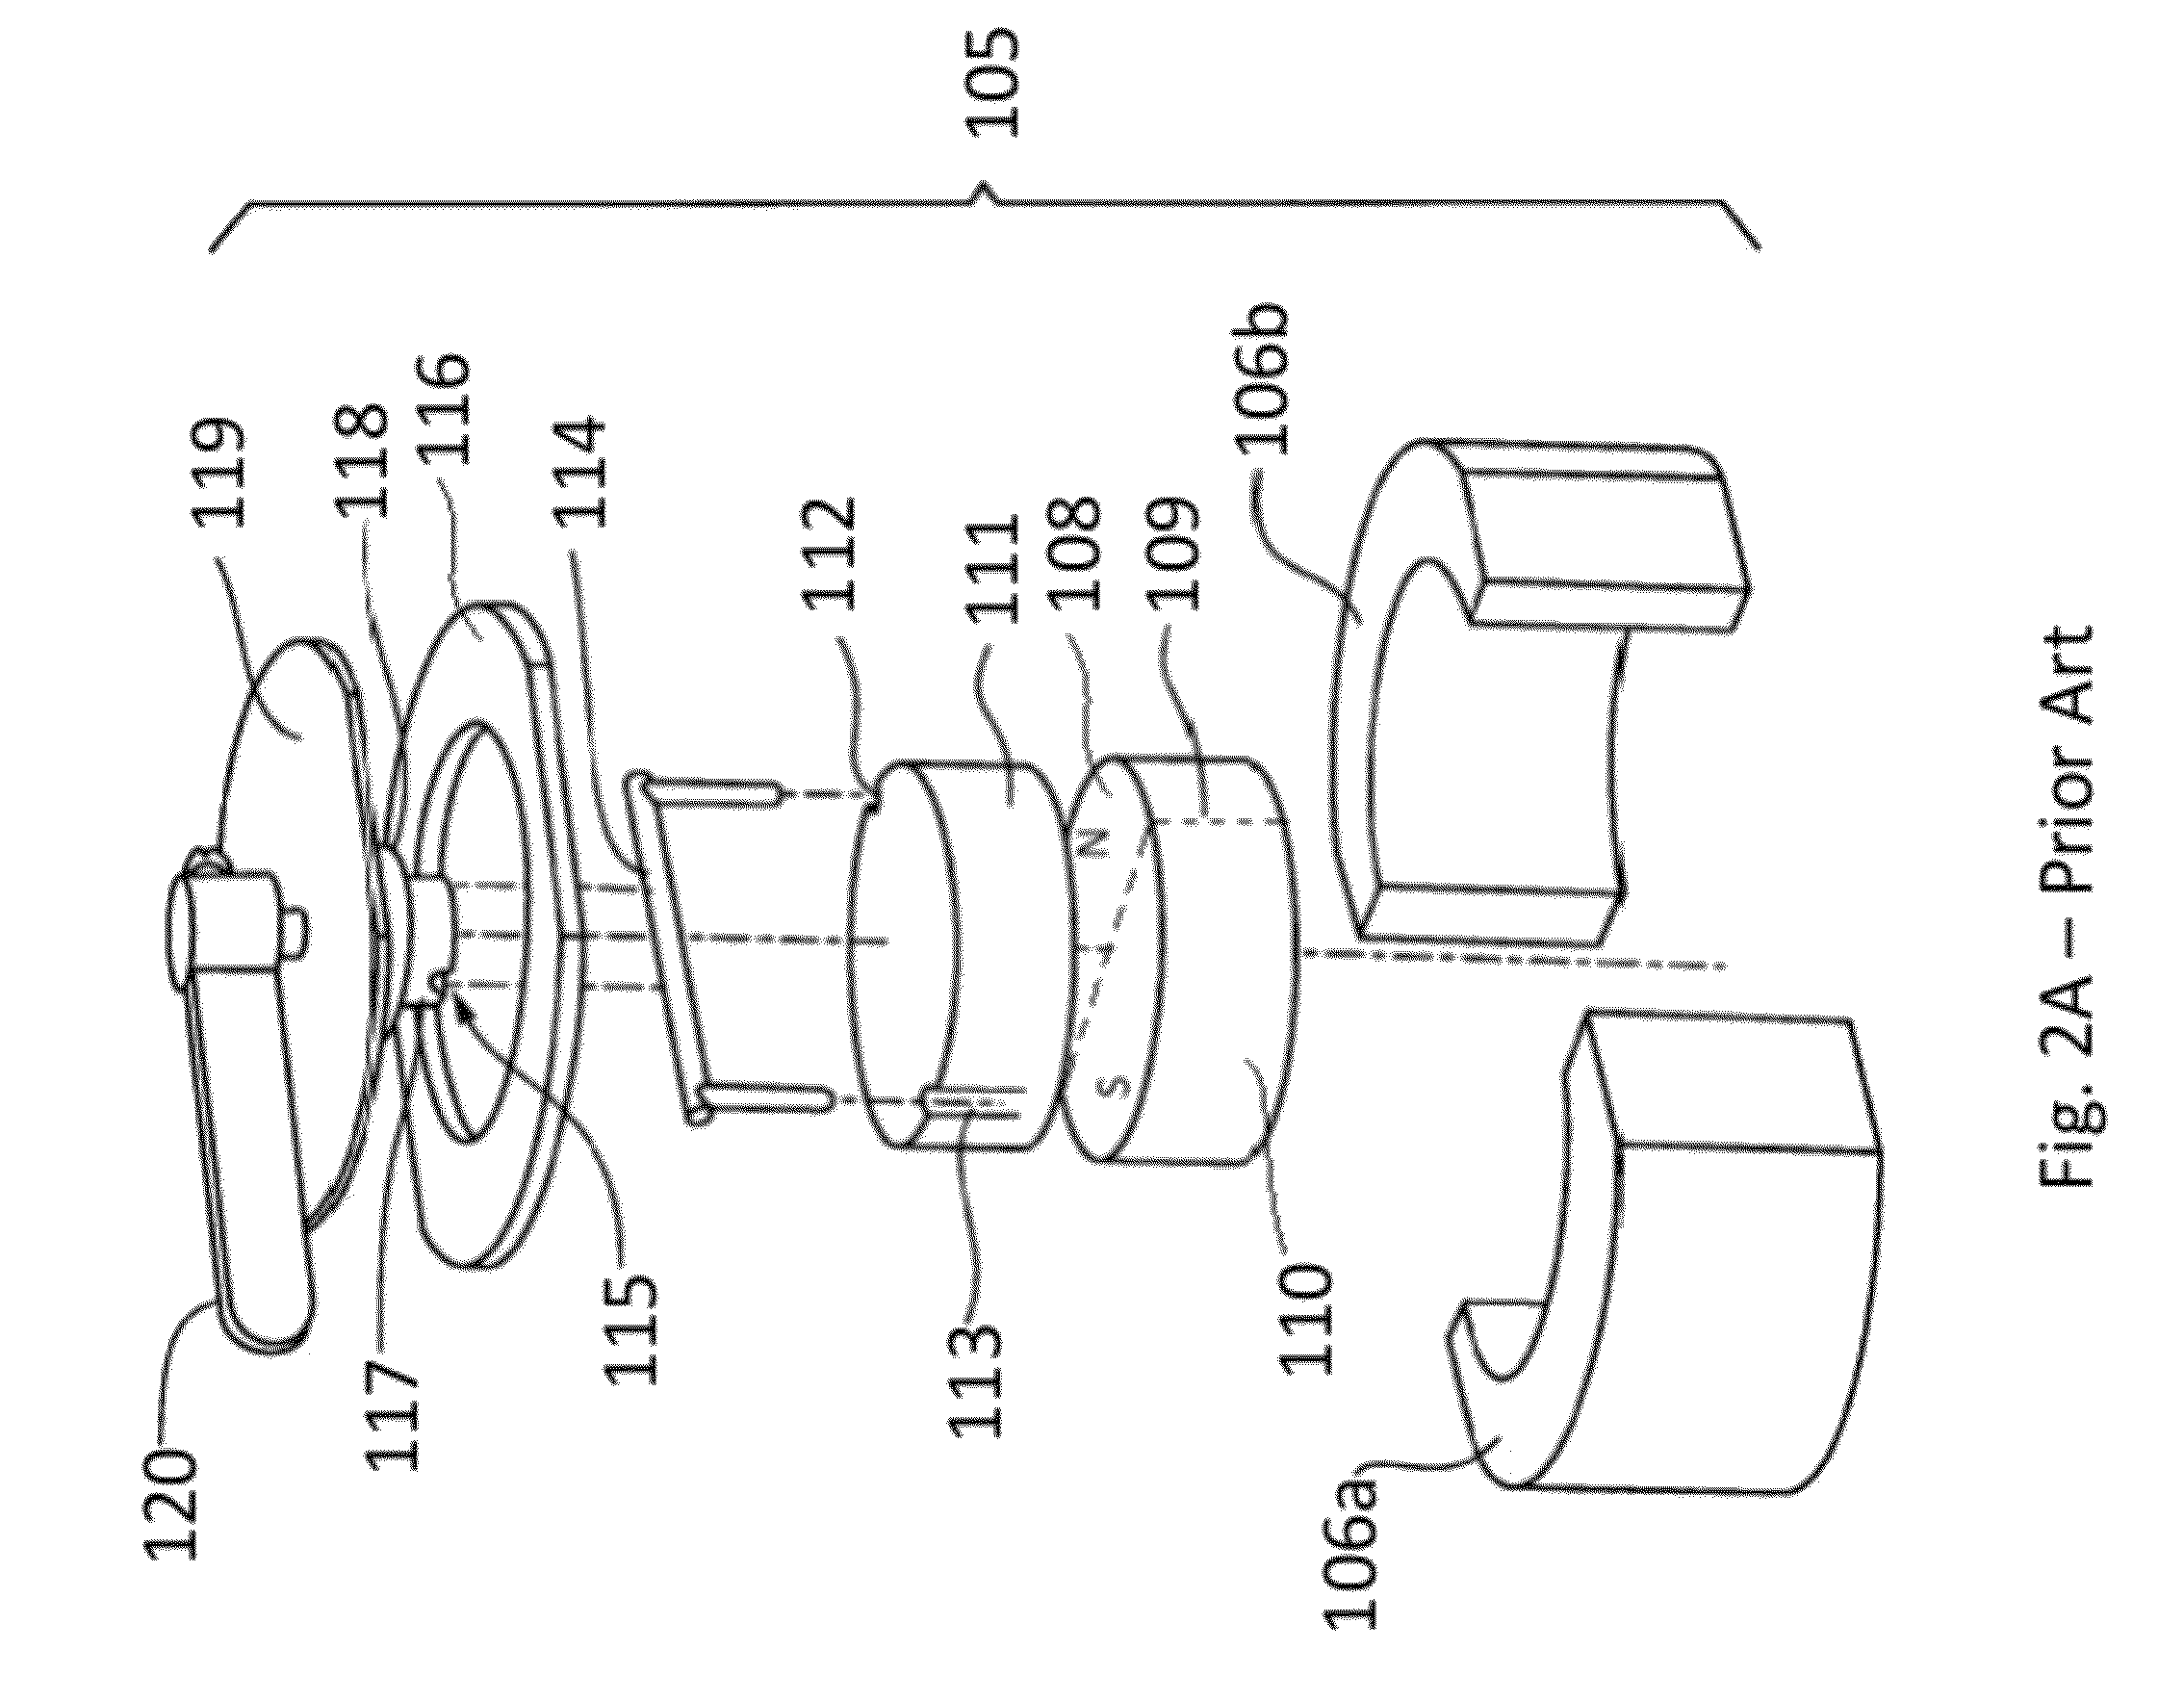 Rotary switchable multi-core element permanent magnet-based apparatus